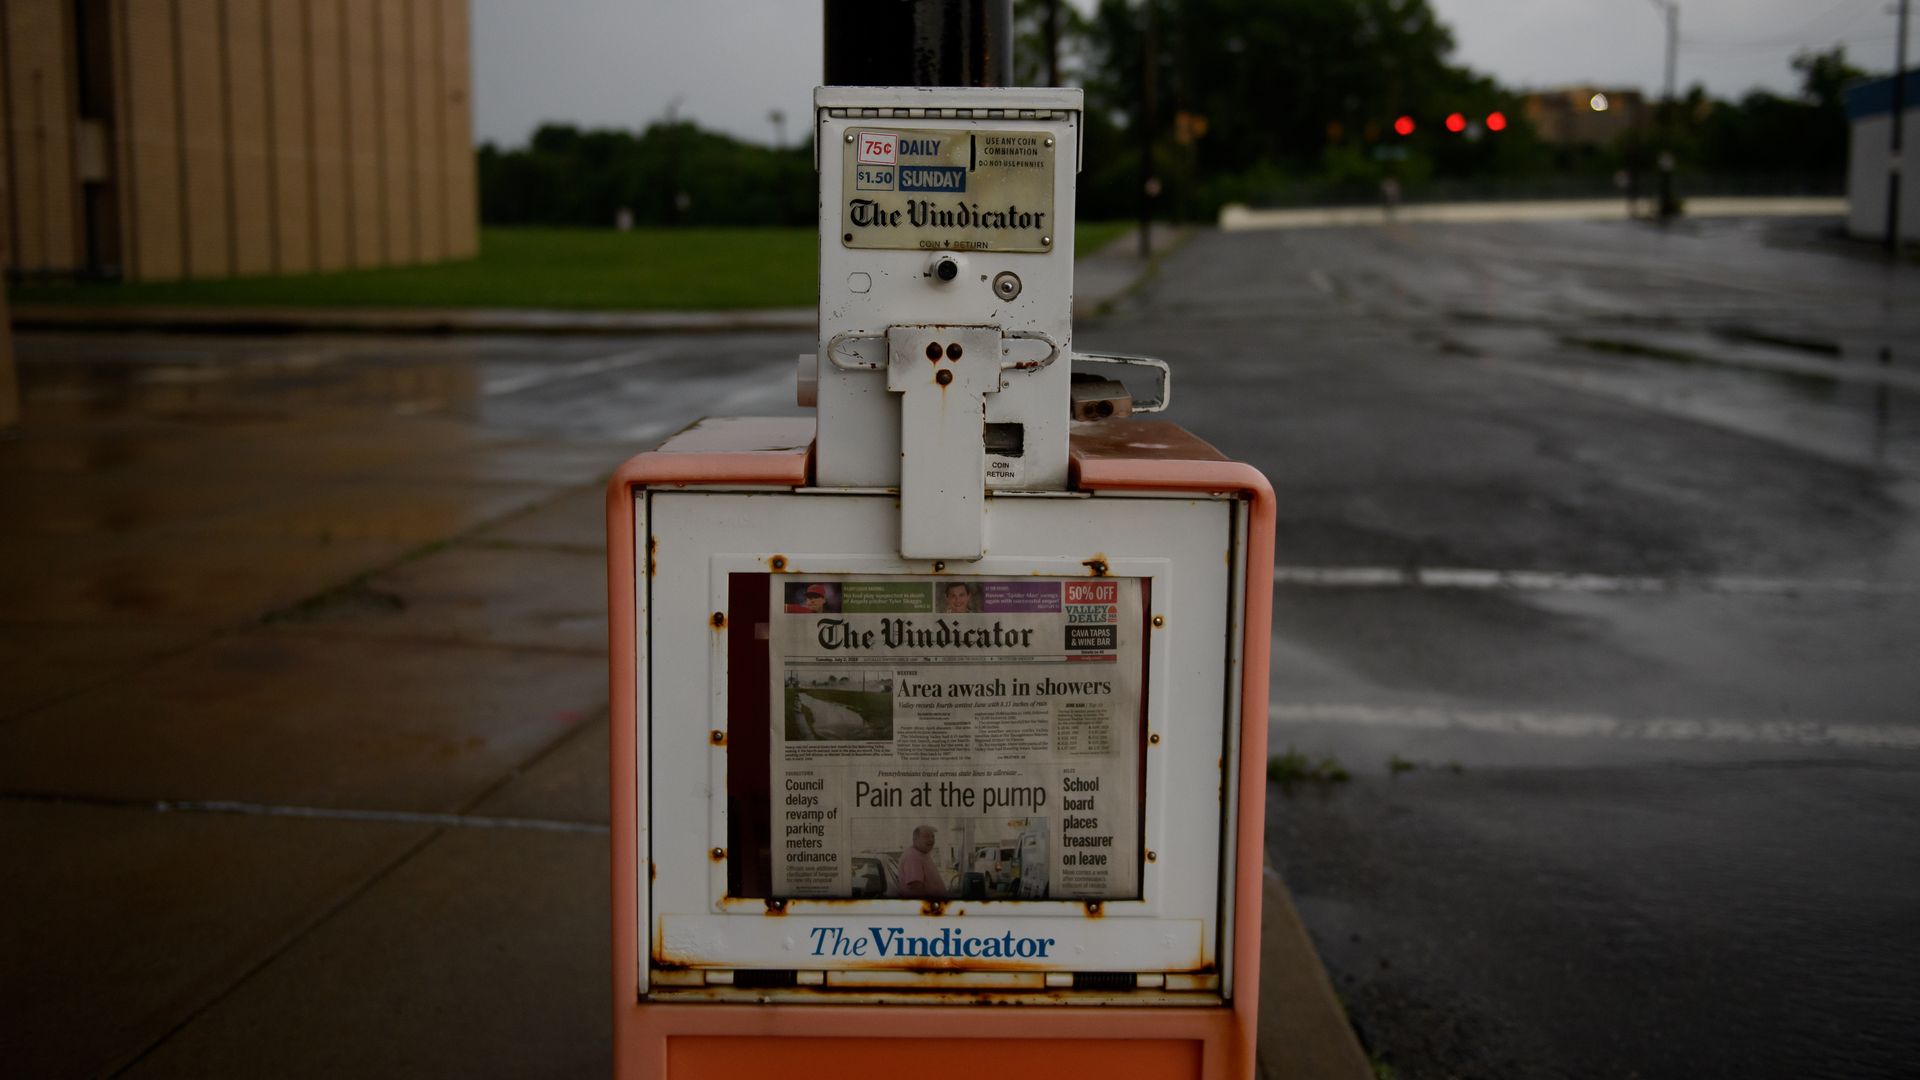 A news paper stand for The Vindicator in Youngstown, Ohio.